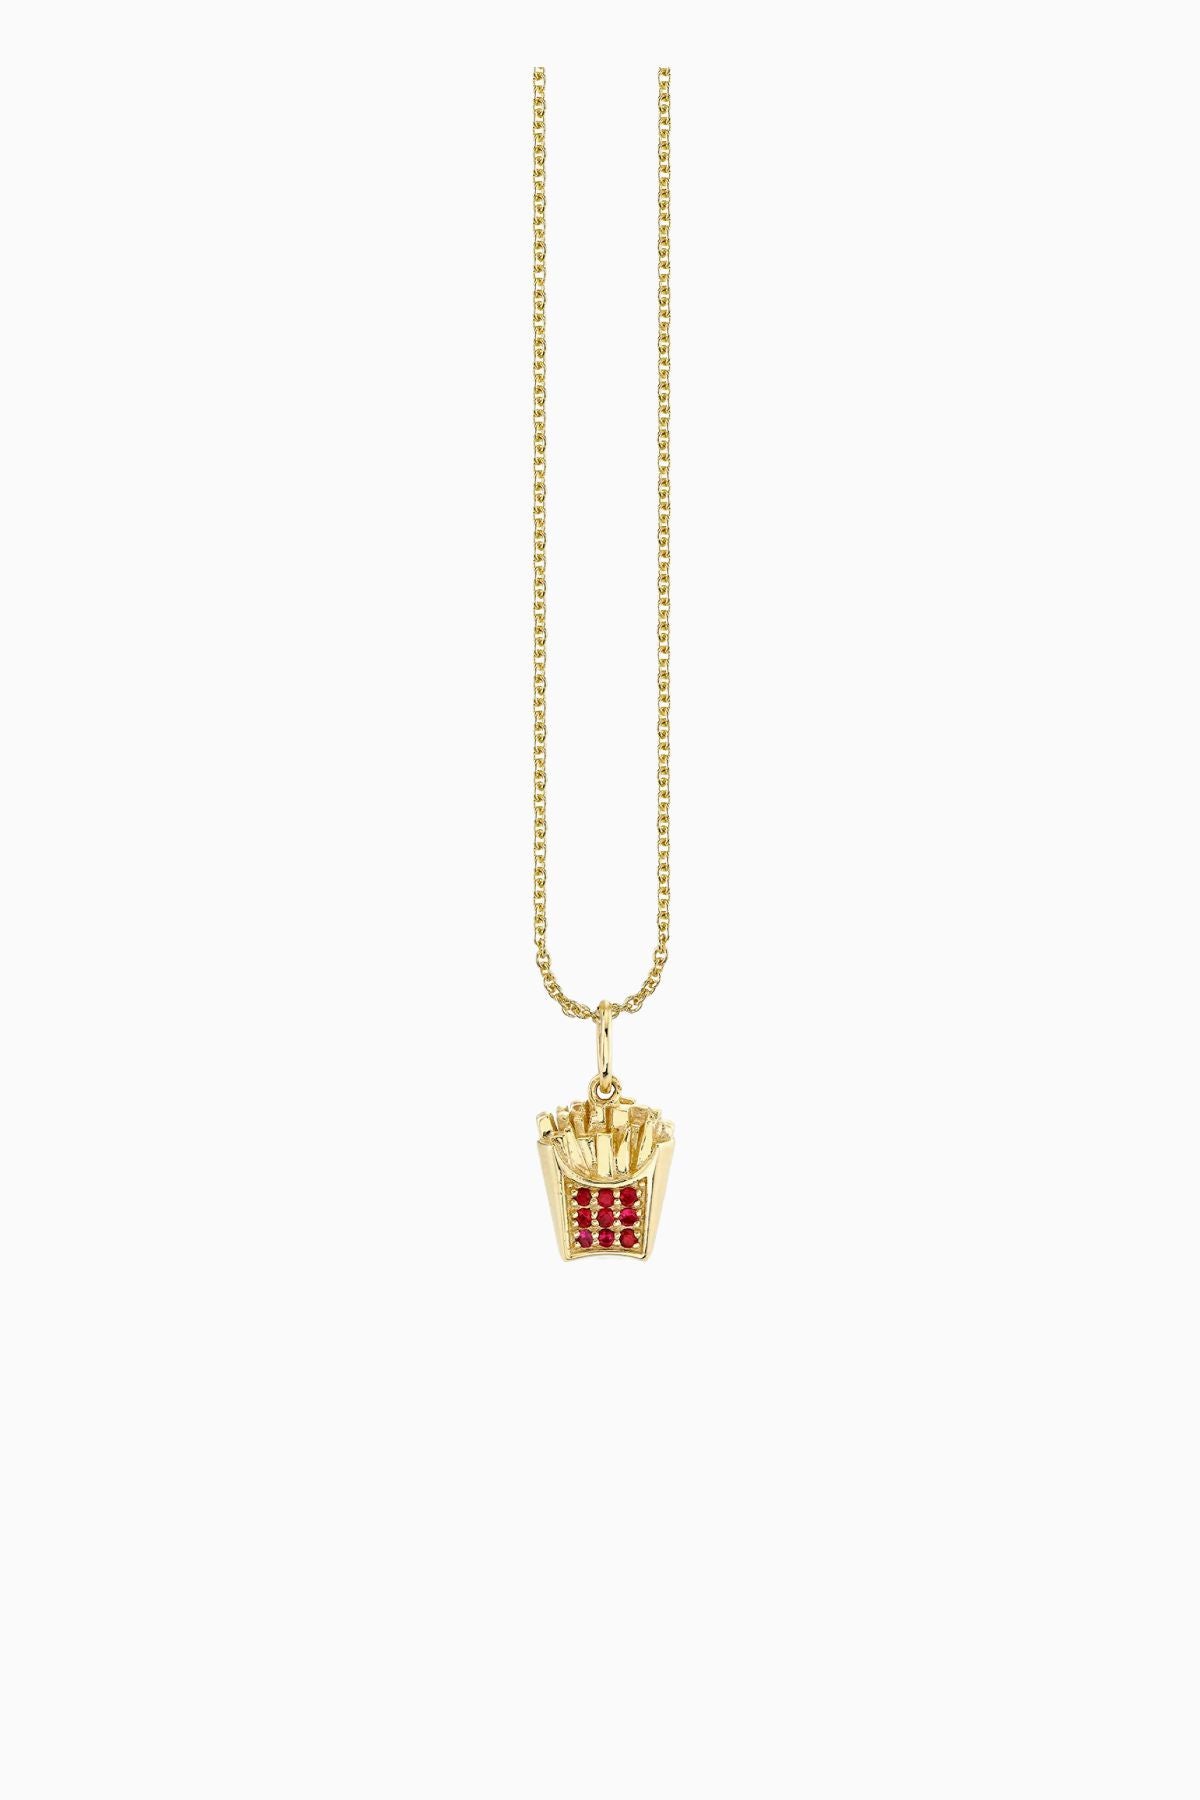 Sydney Evan Fries Charm Necklace - Yellow Gold